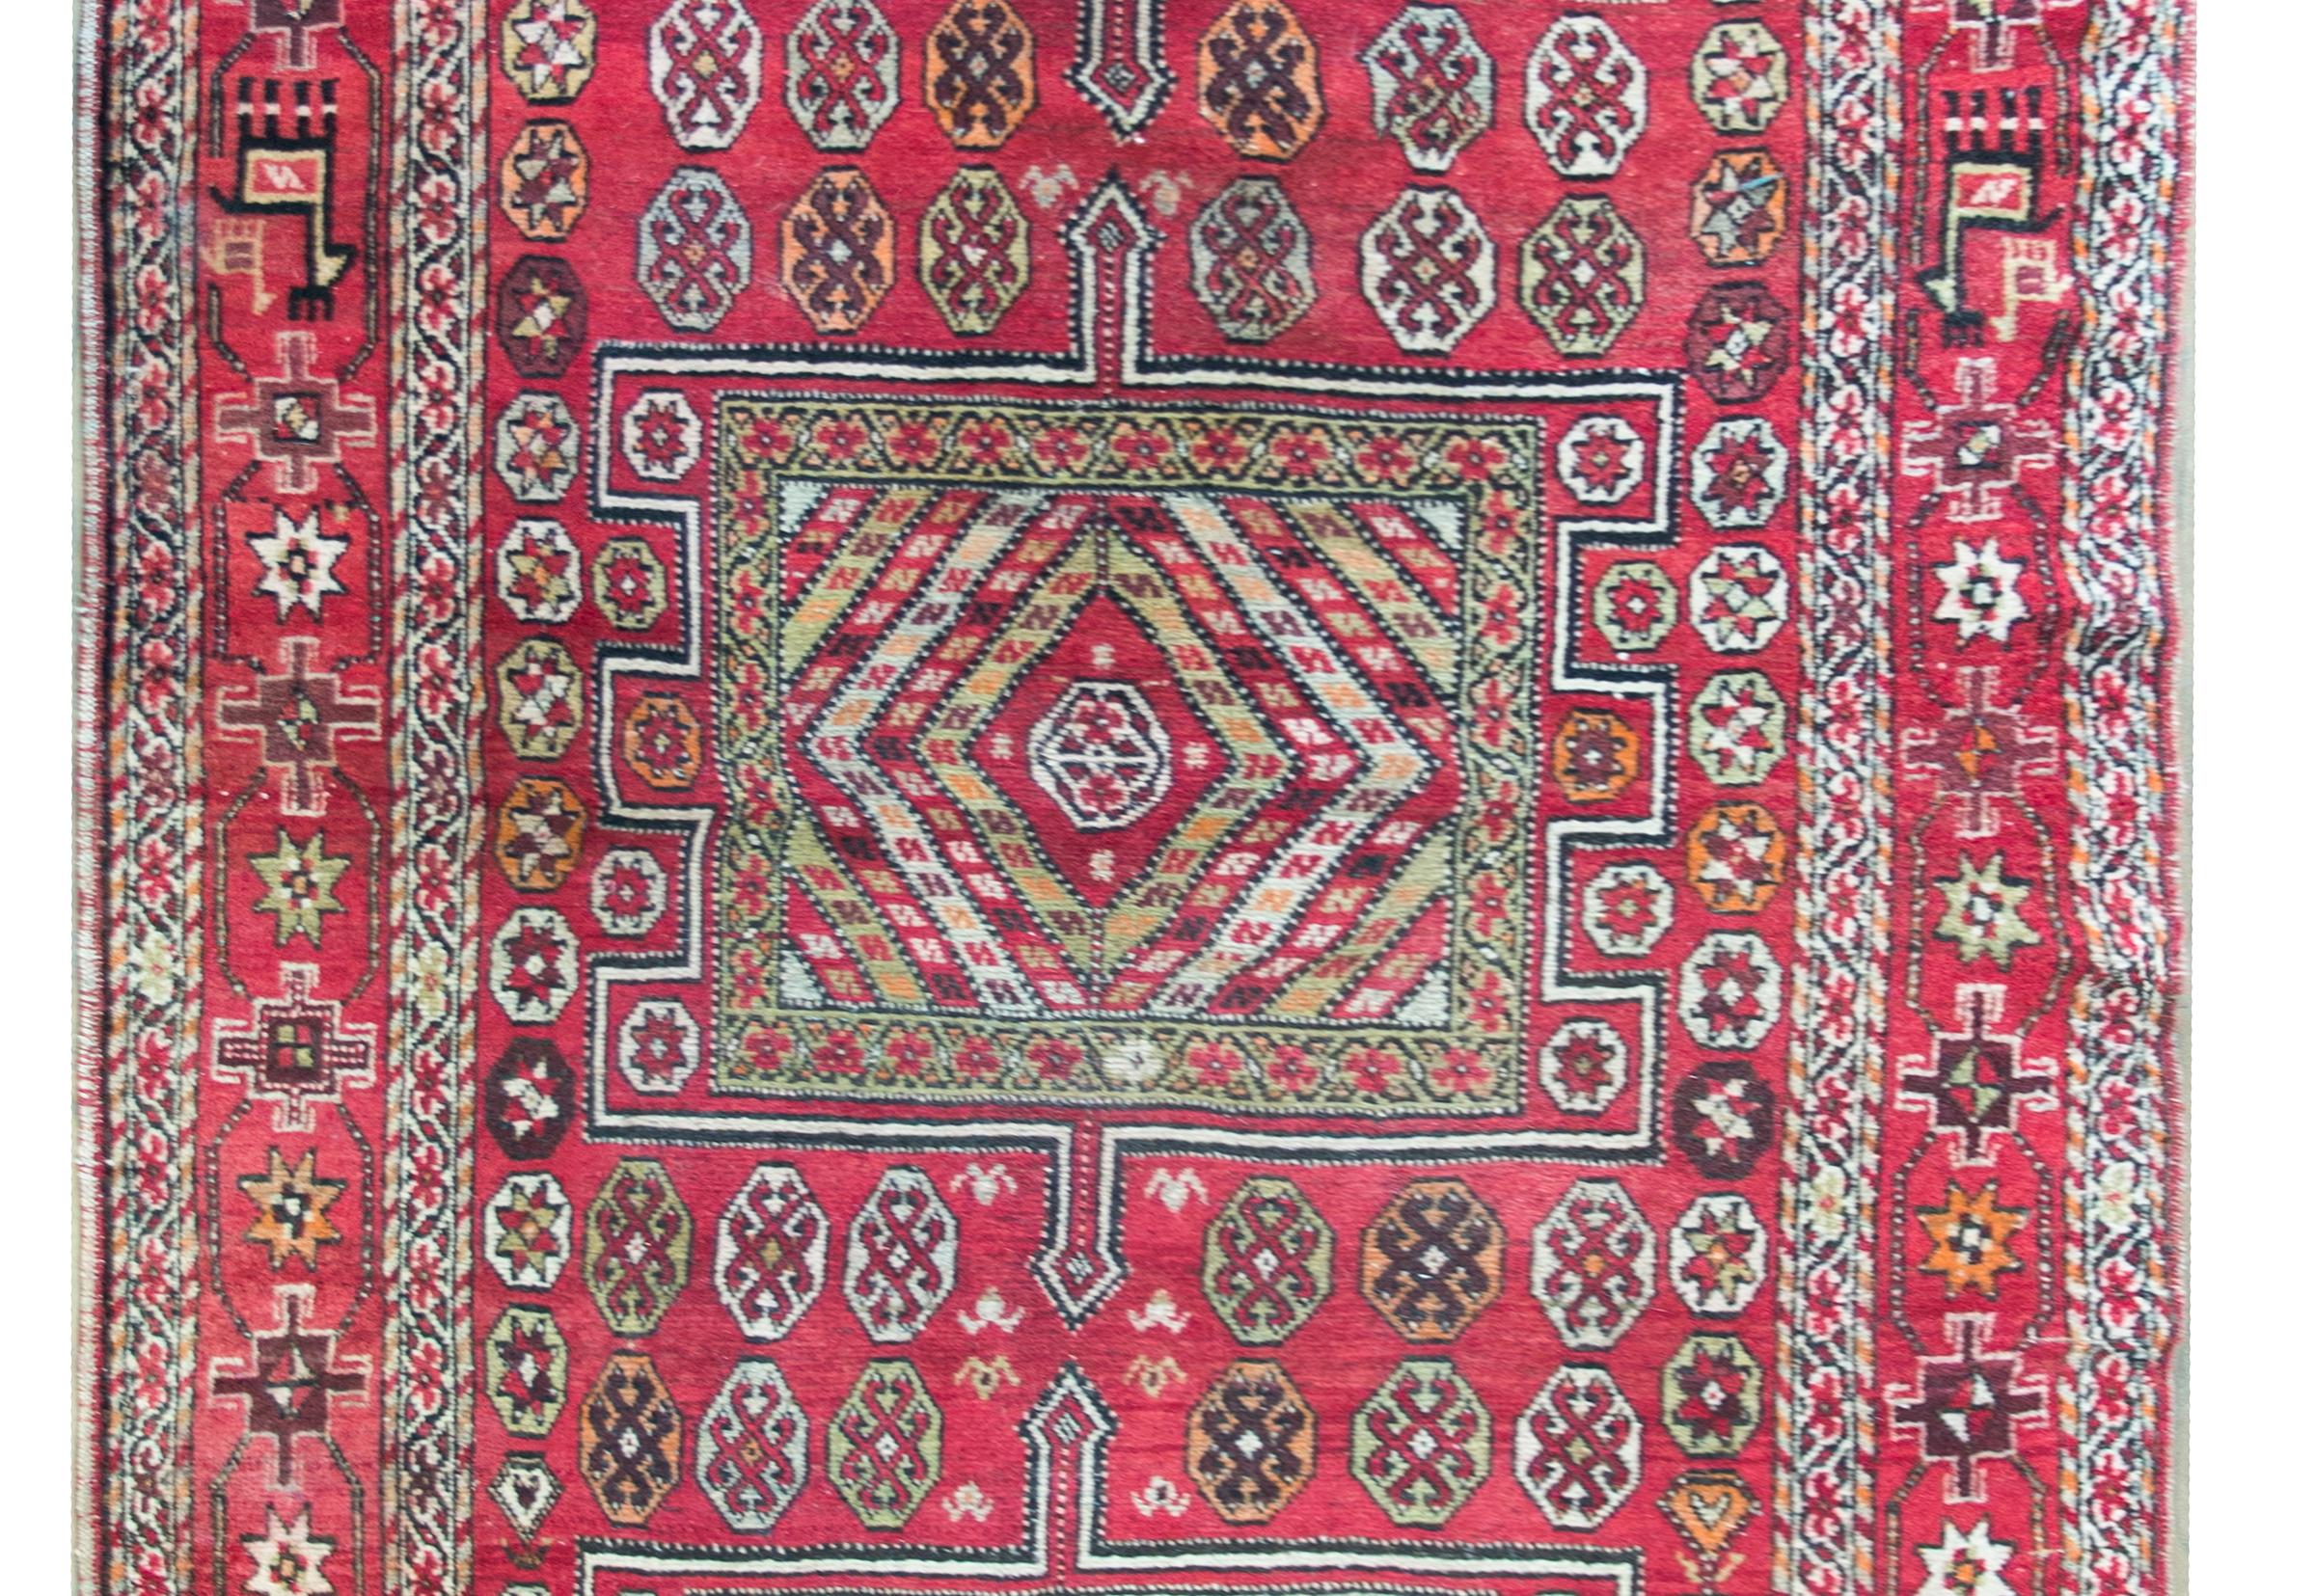 A playful early 20th century Anatolian Turkish rug with three large geometric medallion living amidst a field of stylized flowers, surrounded by several thin floral patterned stripes, and all woven in brilliant crimsons, oranges, pale indigos,